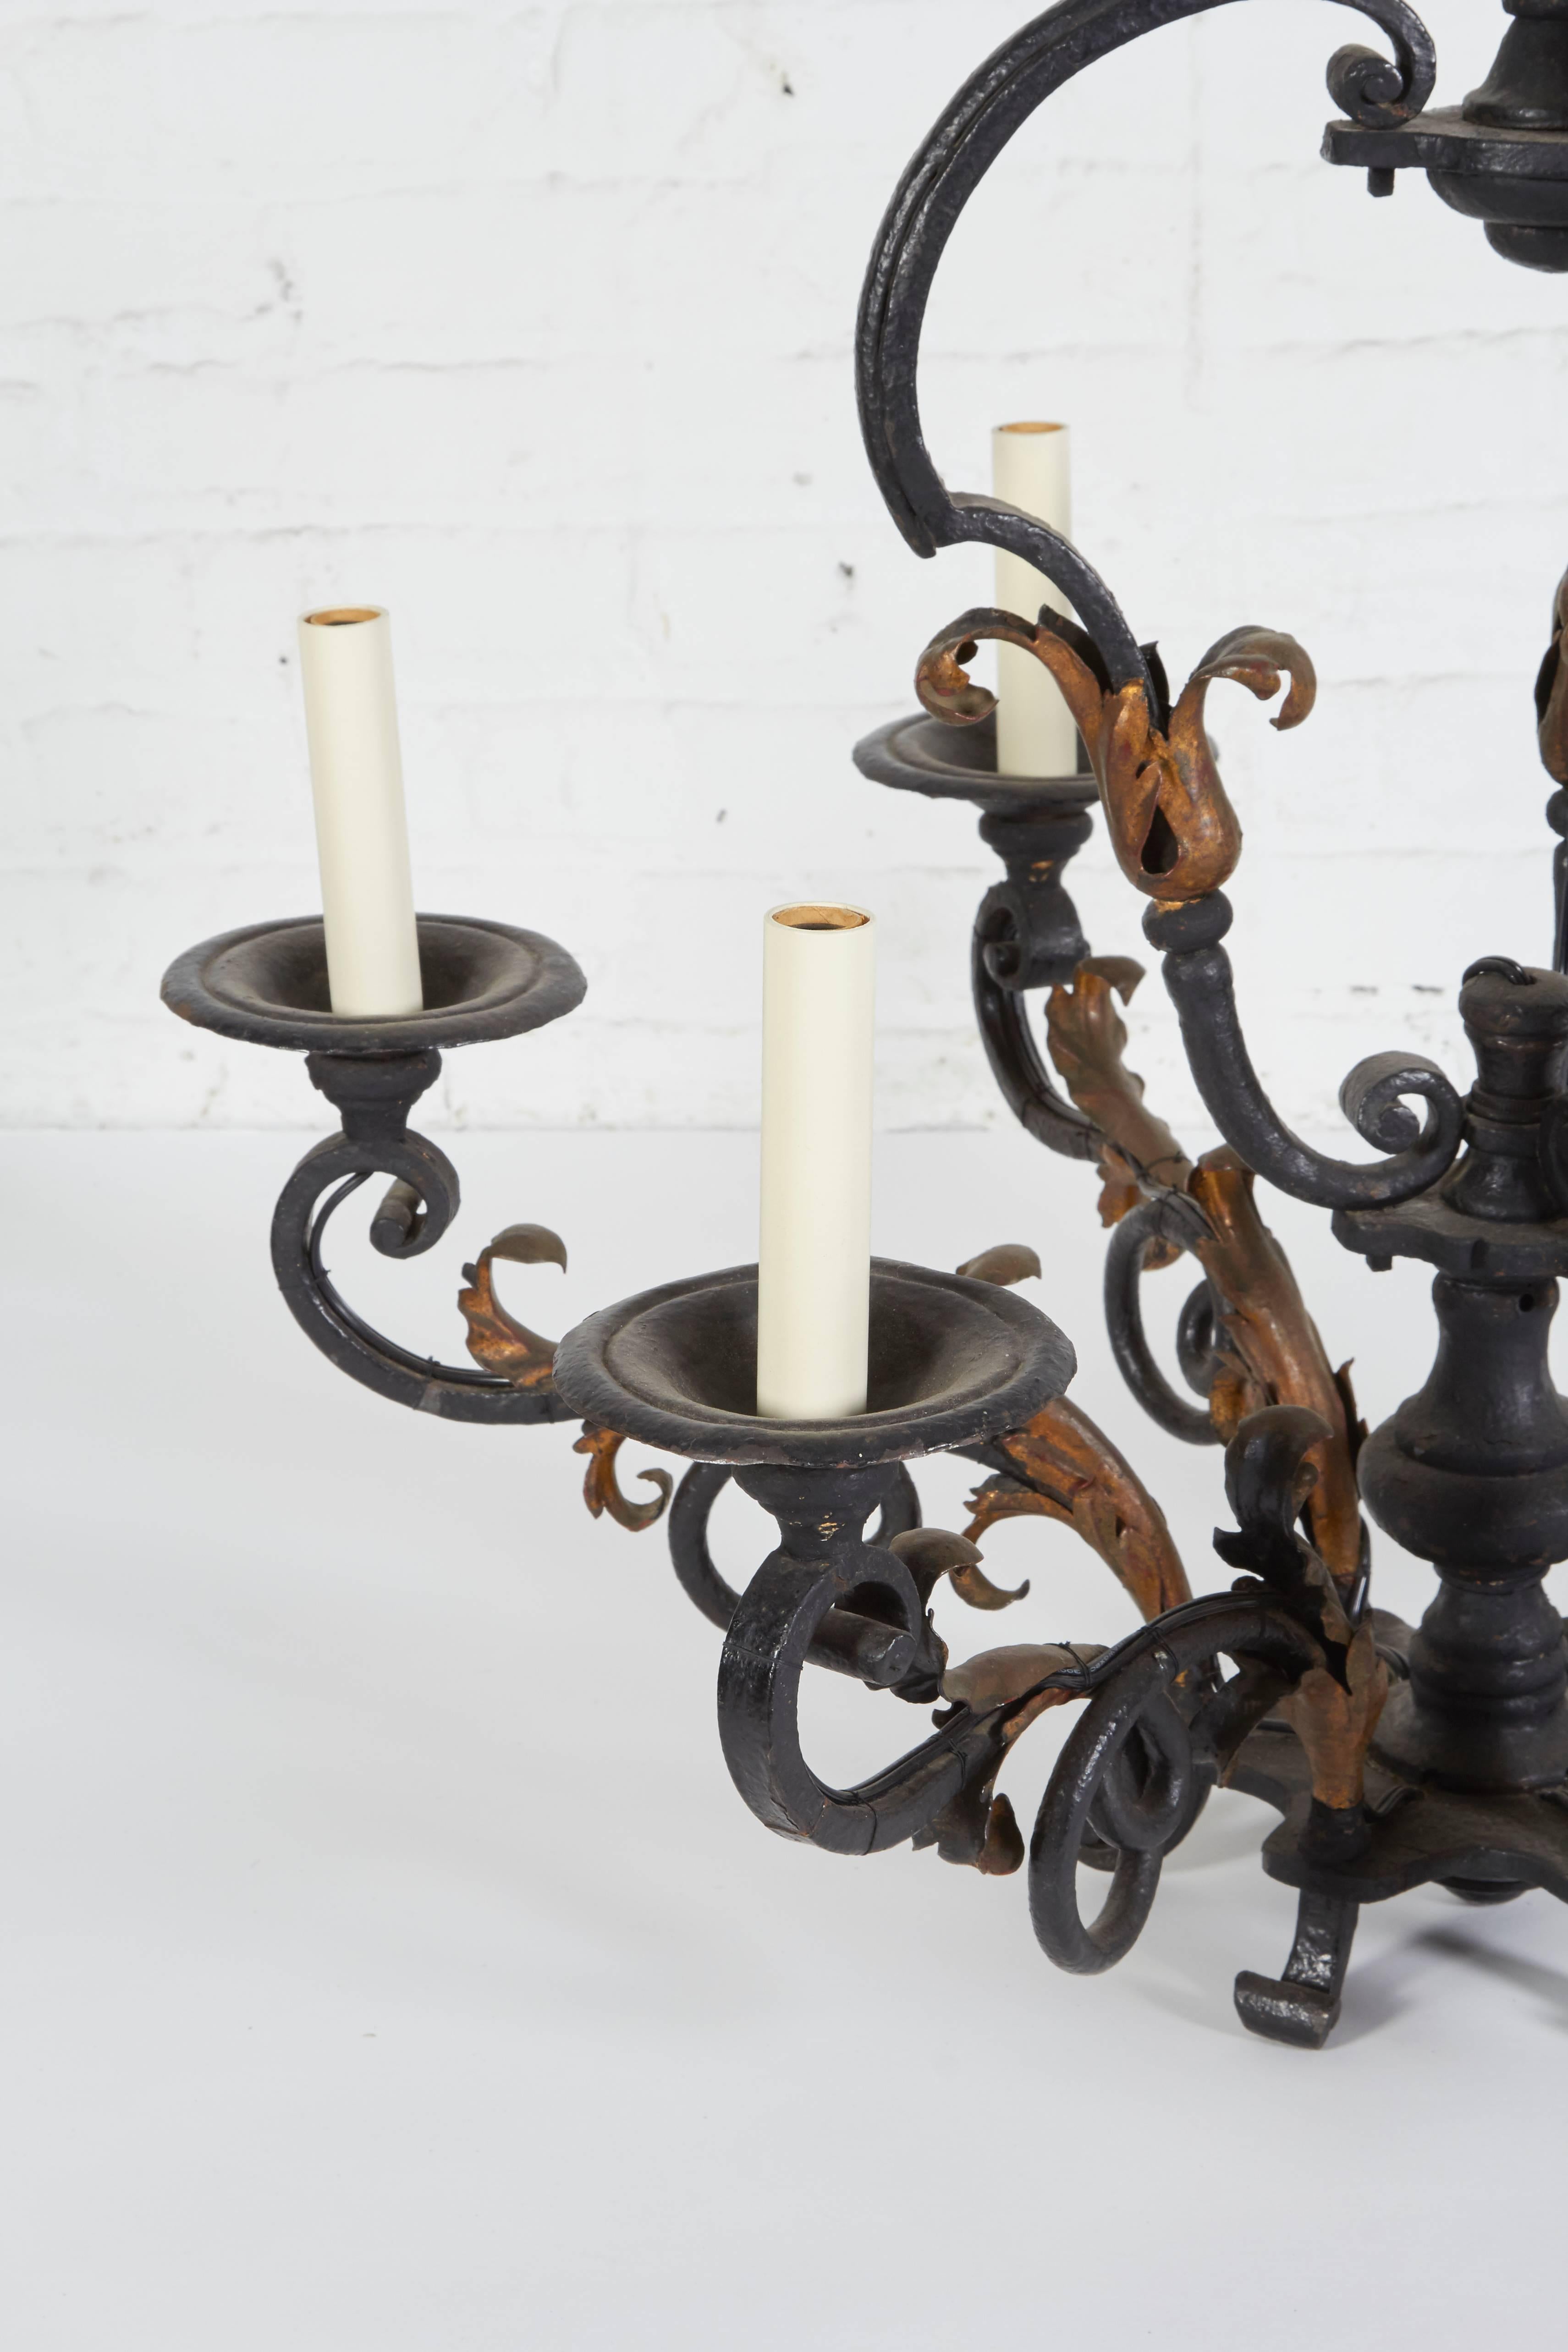 Featuring six outscrolled candle arms with gilt foliate detailing. Has been UL wired for electricity.